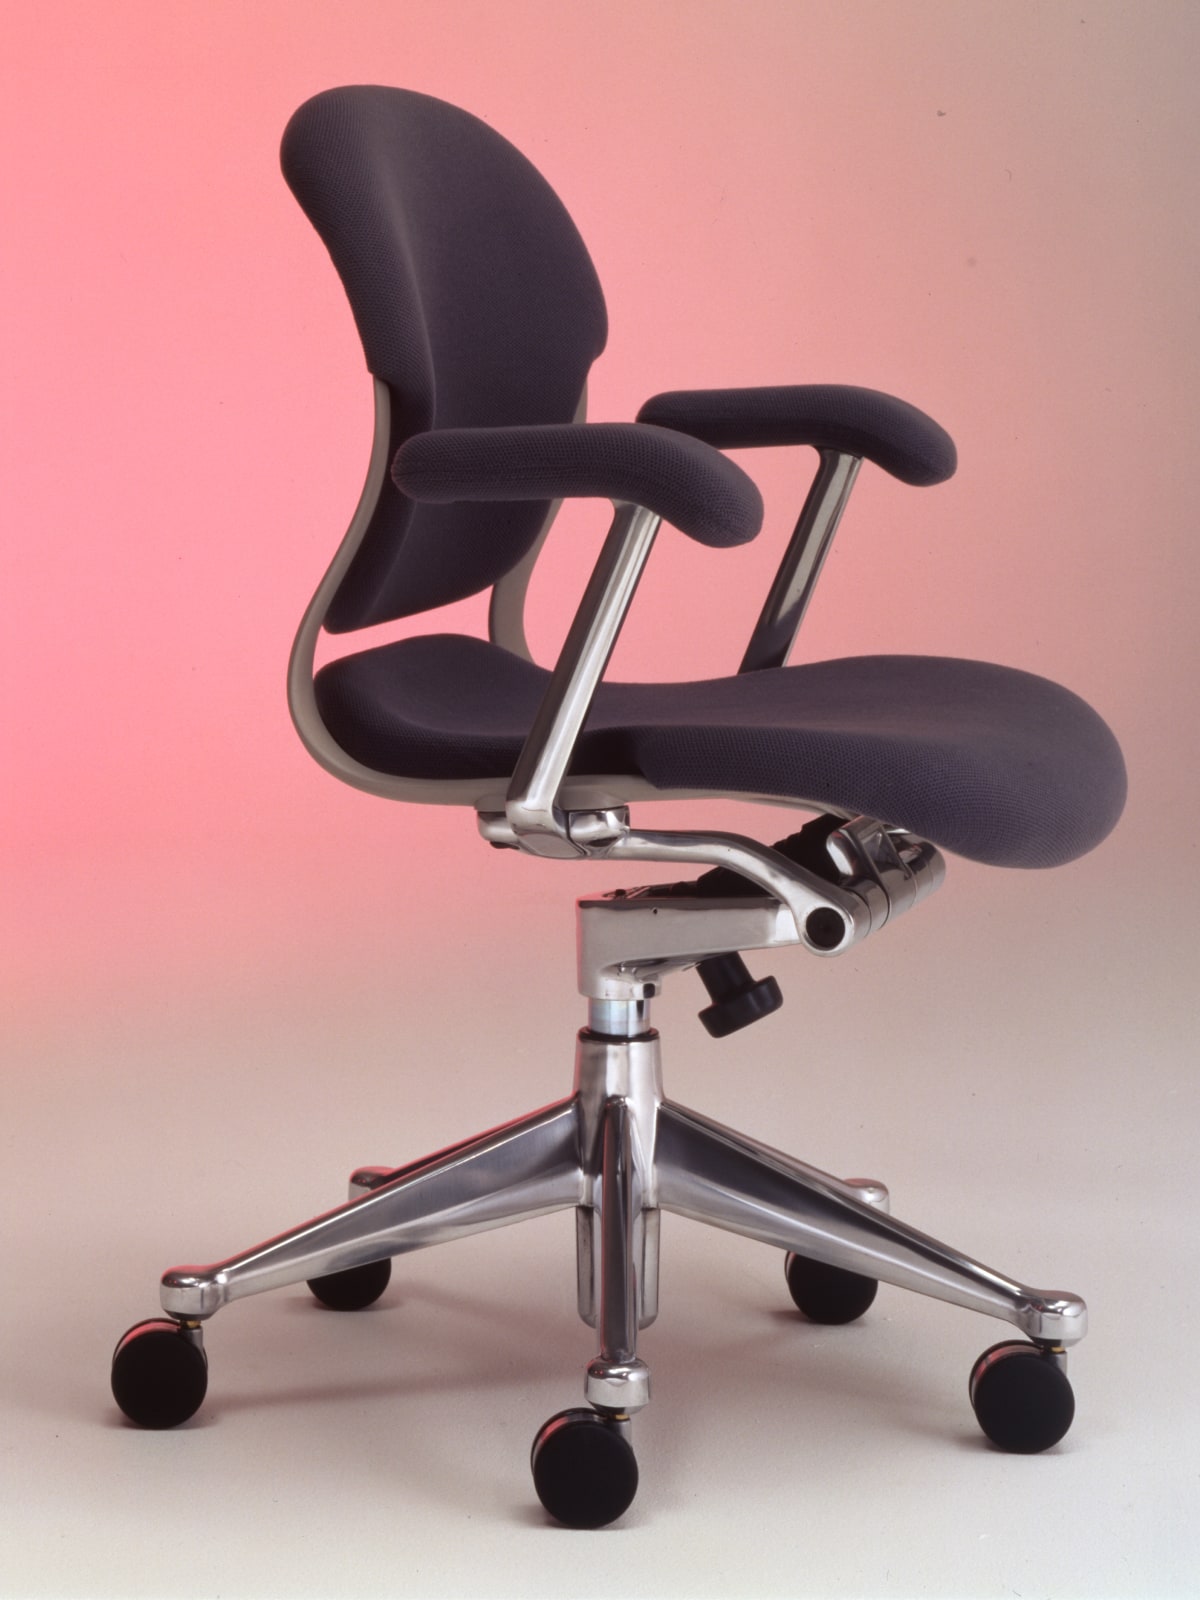 Used Herman Miller Reaction Chairs 